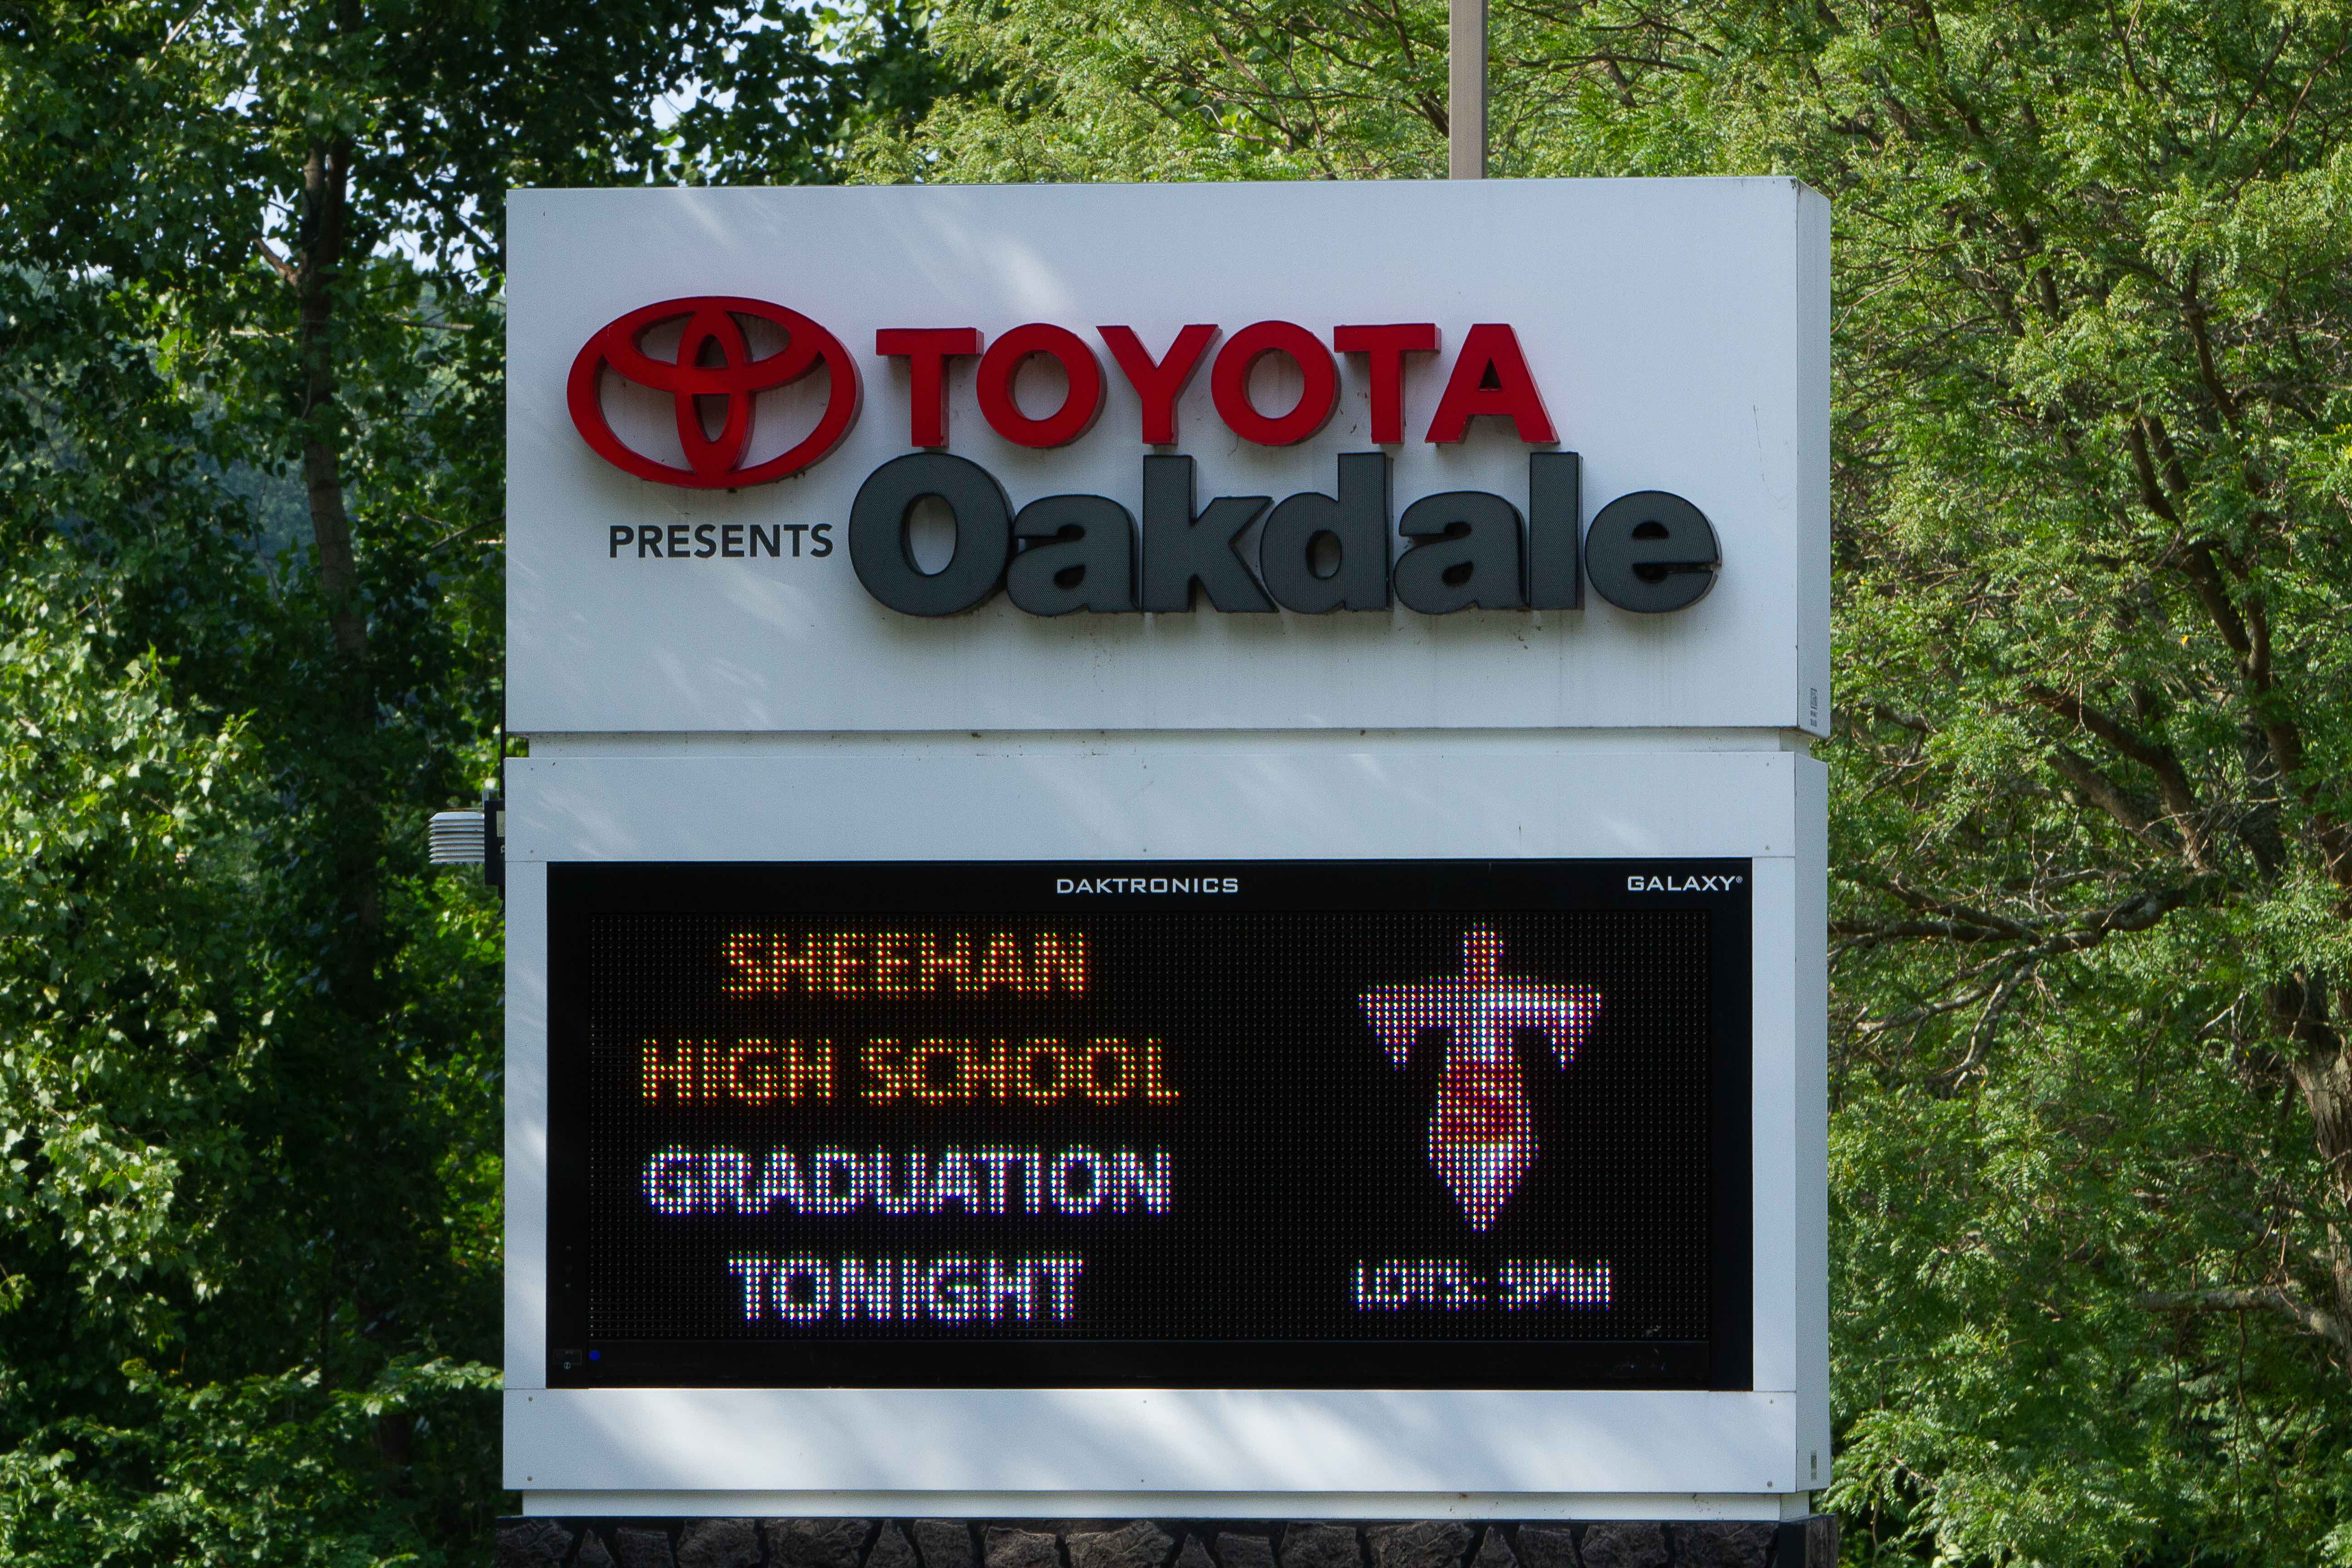 Toyota Presents Oakdale Theatre marquee displays drive-in graduation information